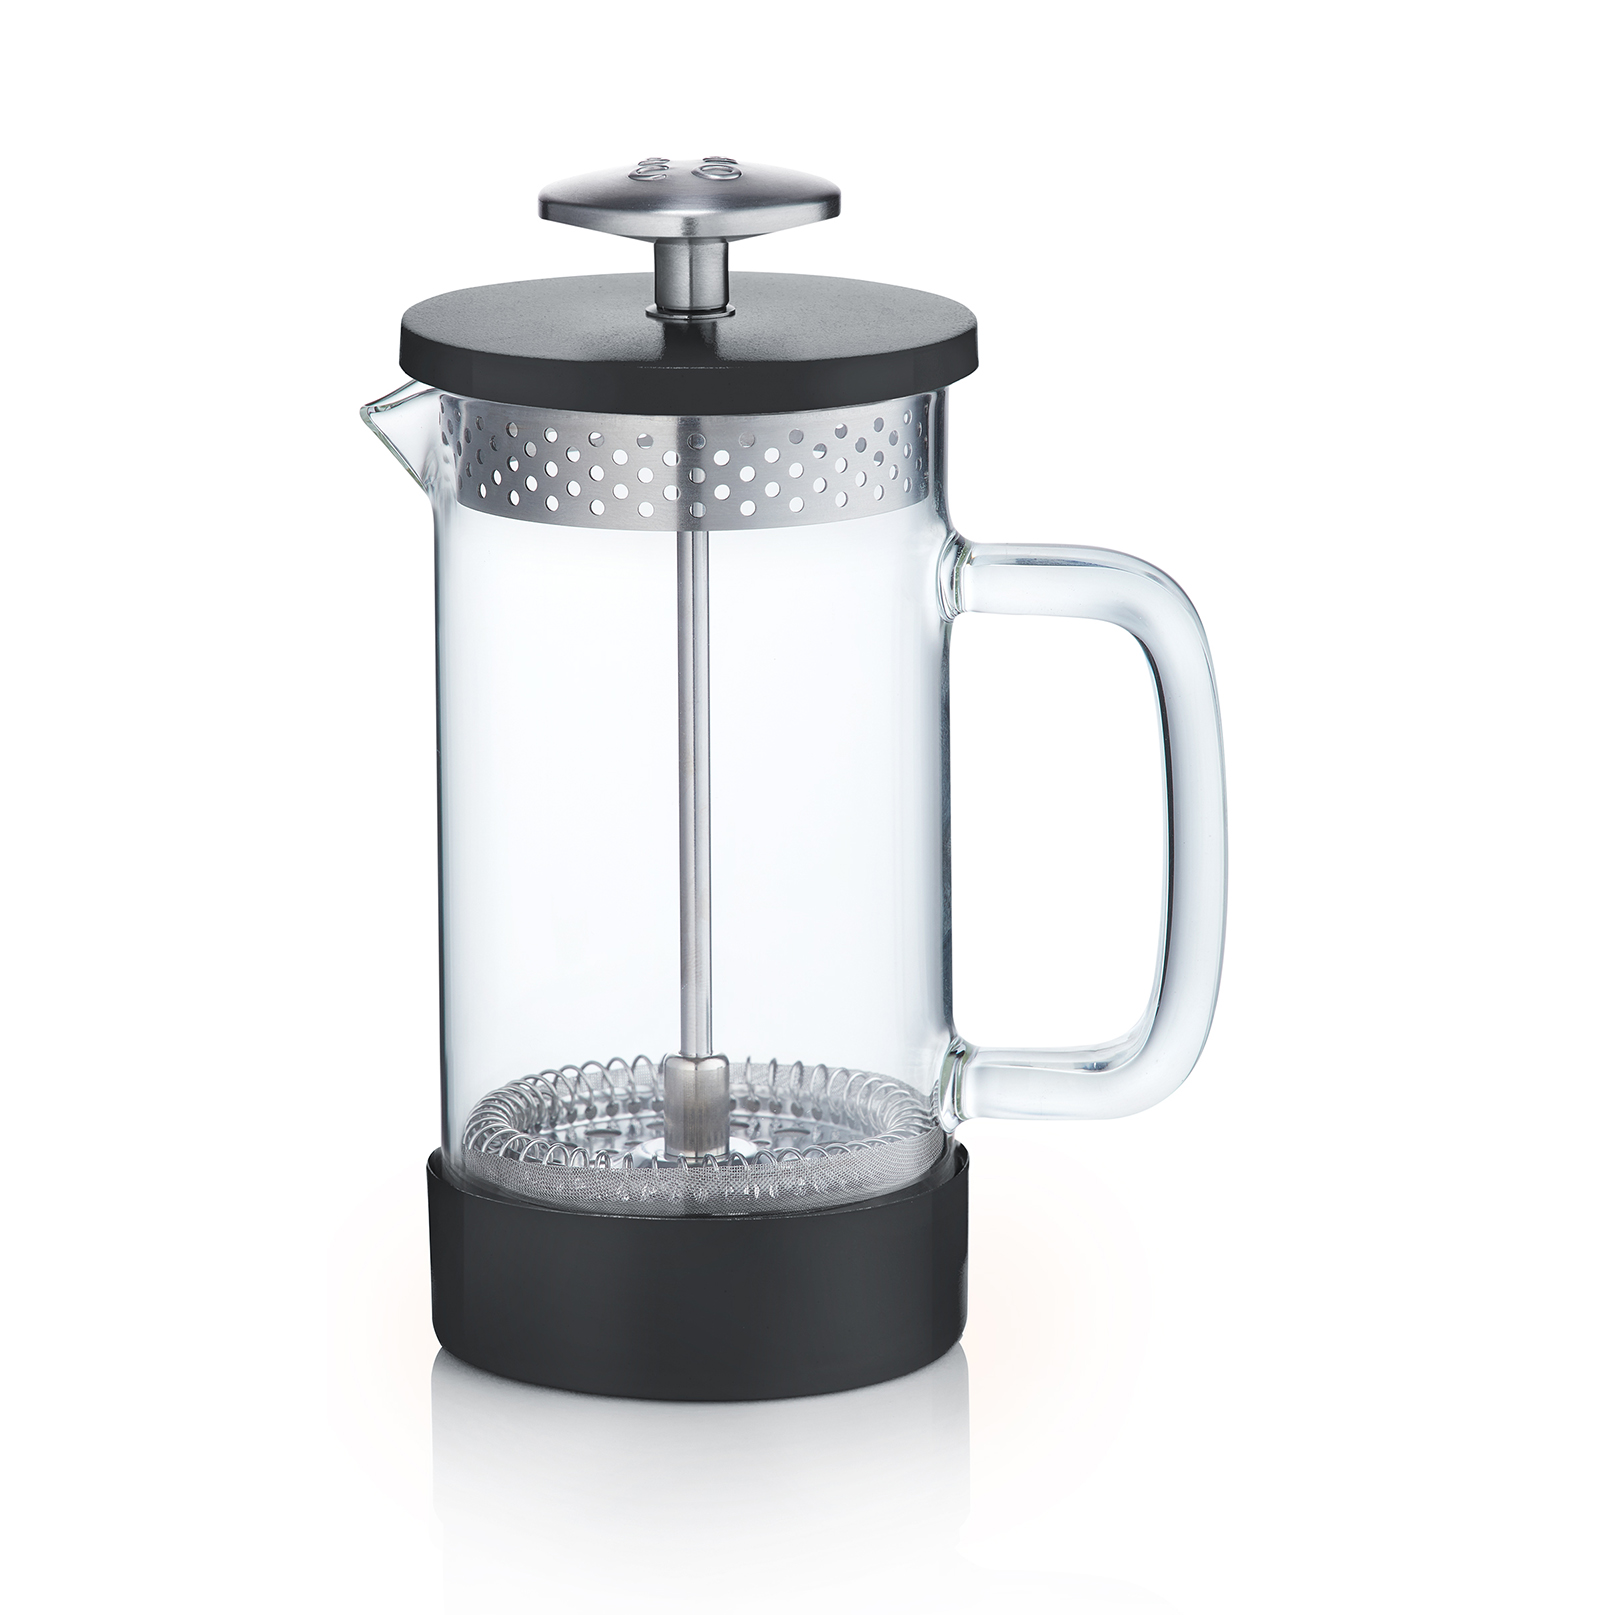 0.35 L / 12 oz 3 Cup Cafetiere Coffee Press with Triple Stainless Steel Filter RAINBEAN French Press Maker for Filter Coffee Heat Resistant Borosilicate Glass Loose Tea and Milk Froth 